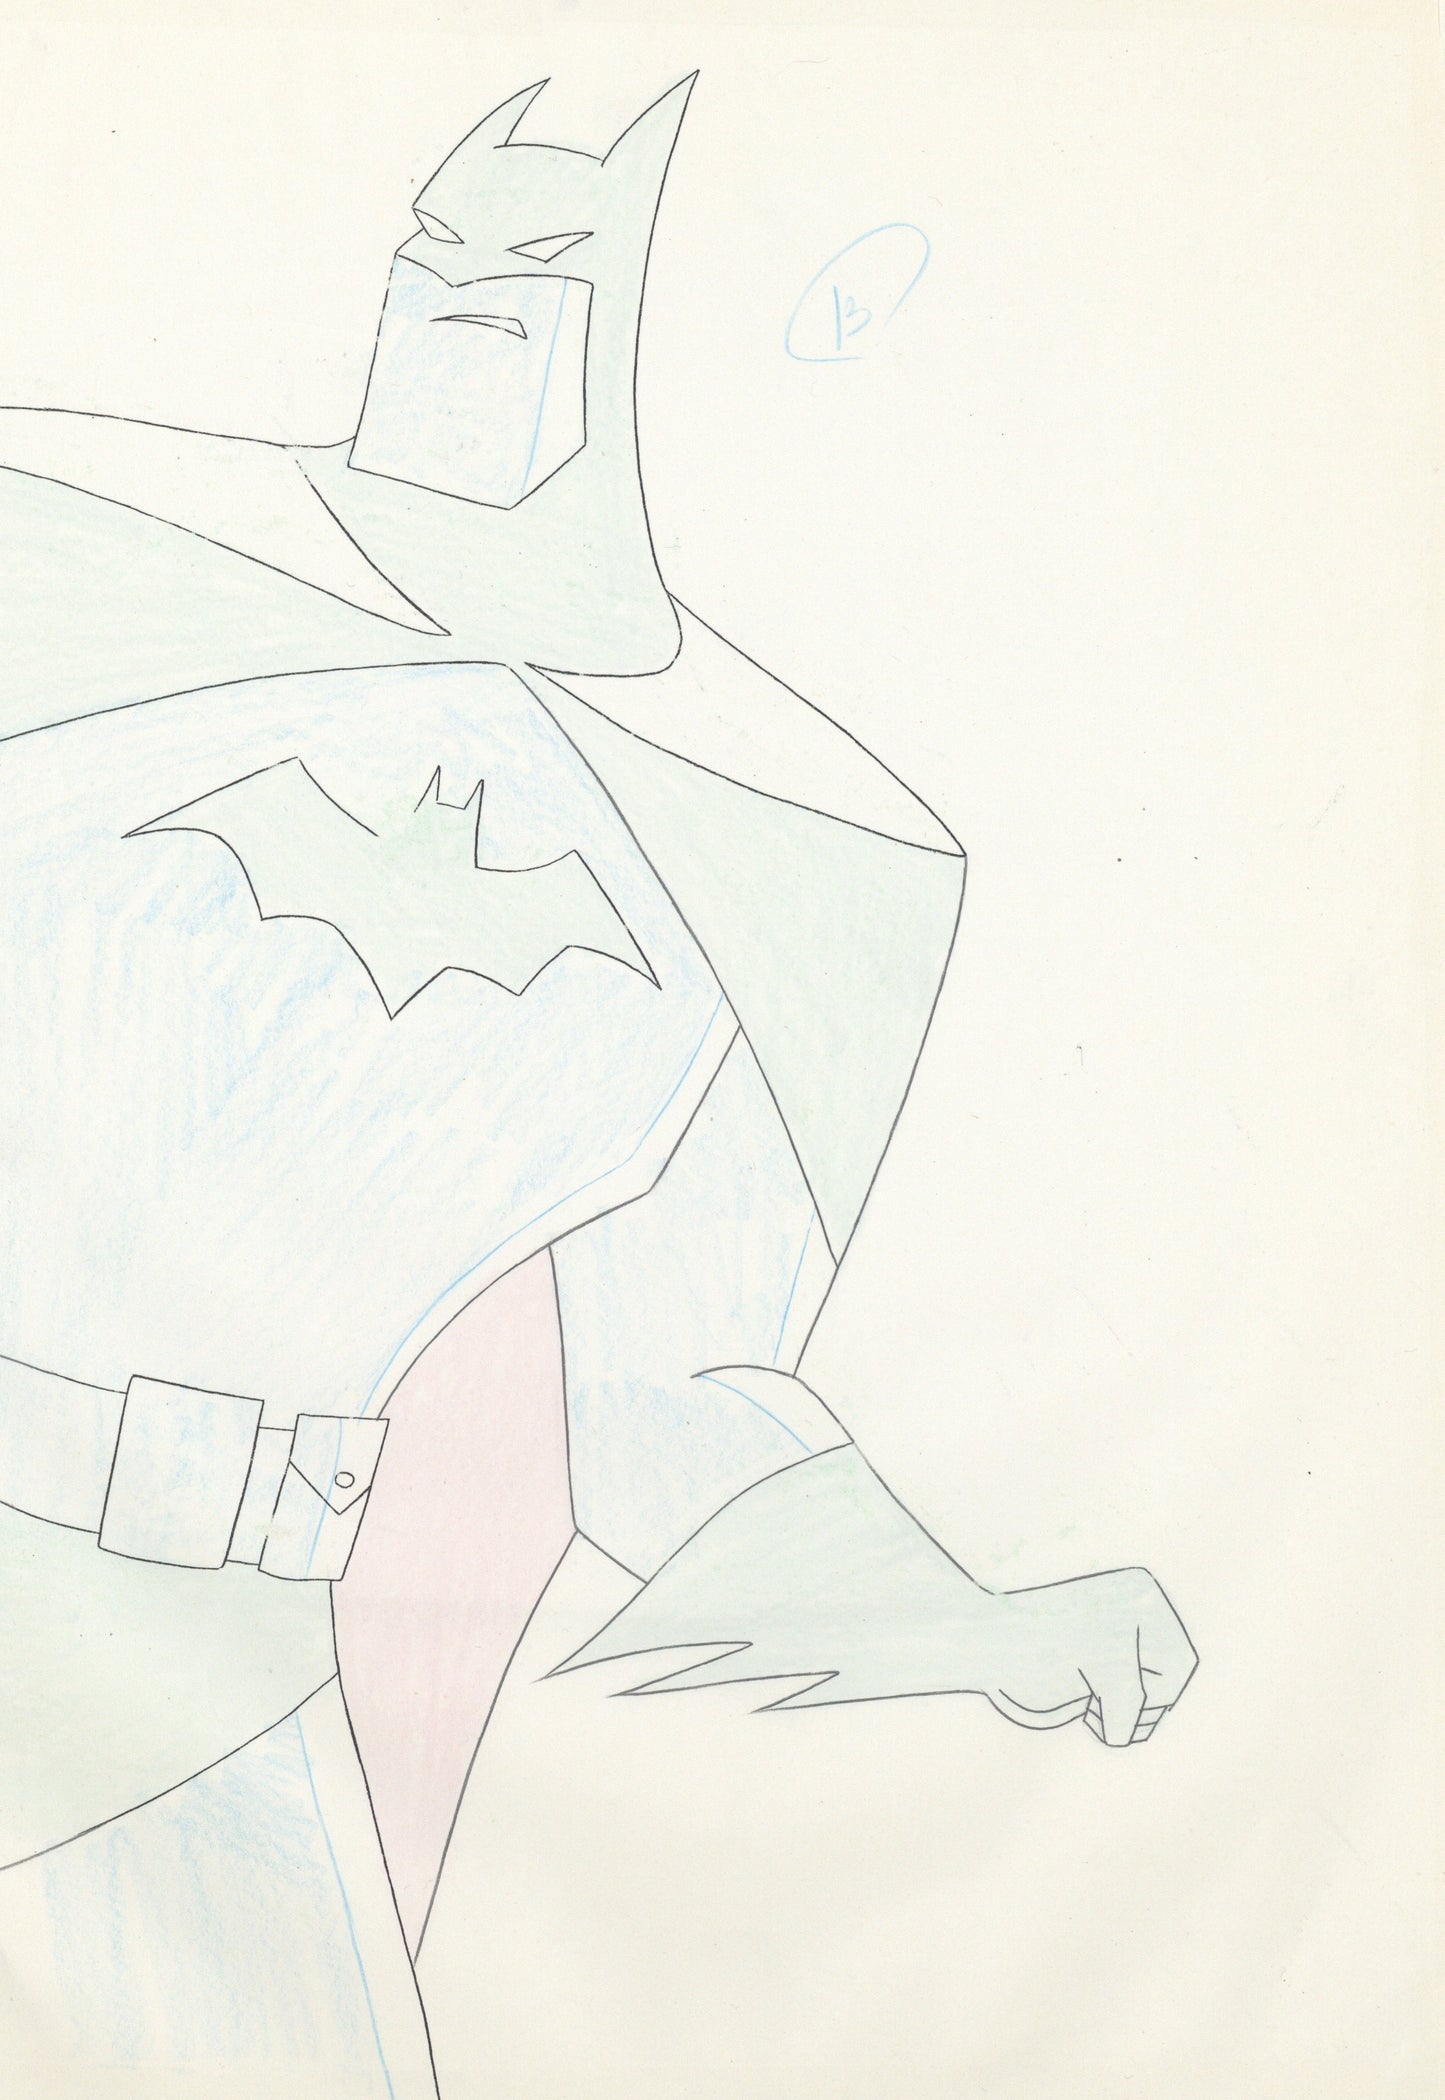 The New Batman Adventures Original Production Cel with Matching Drawing (Oversized): Batman